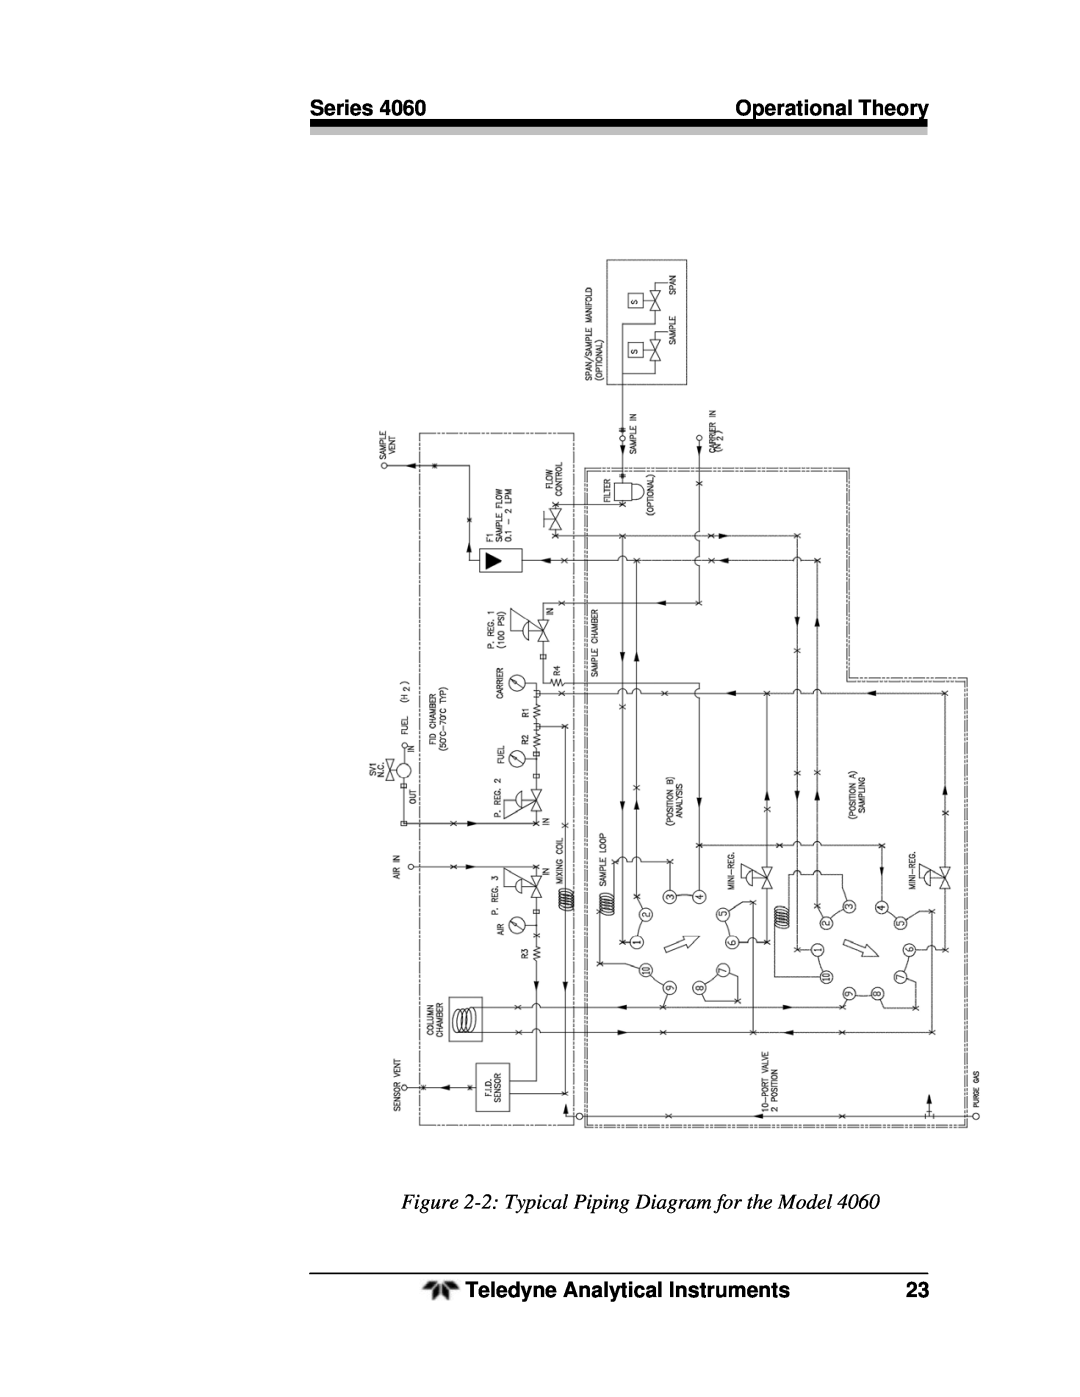 Teledyne 4060 manual 2 Typical Piping Diagram for the Model, Series, Operational Theory, Teledyne Analytical Instruments 